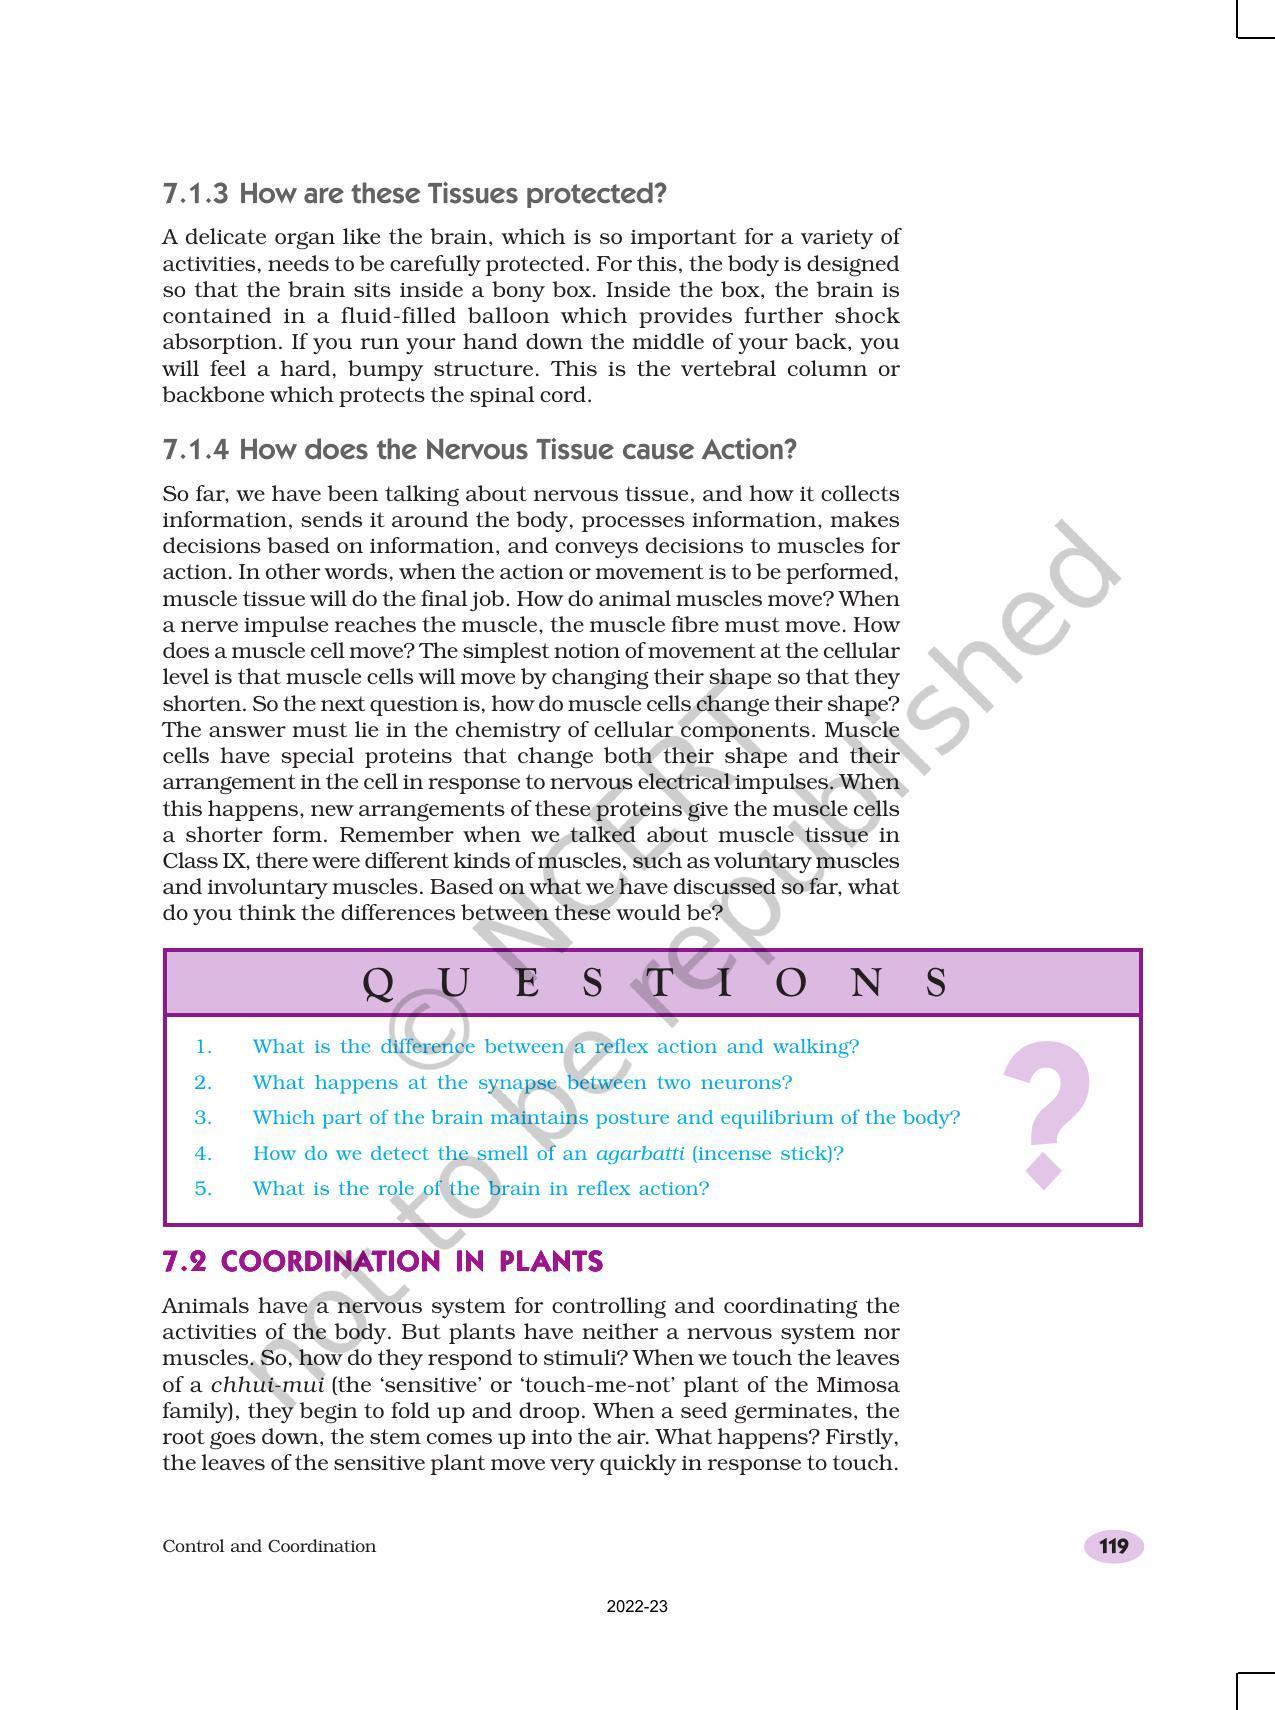 NCERT Book for Class 10 Science Chapter 7 Control and Coordination - Page 6